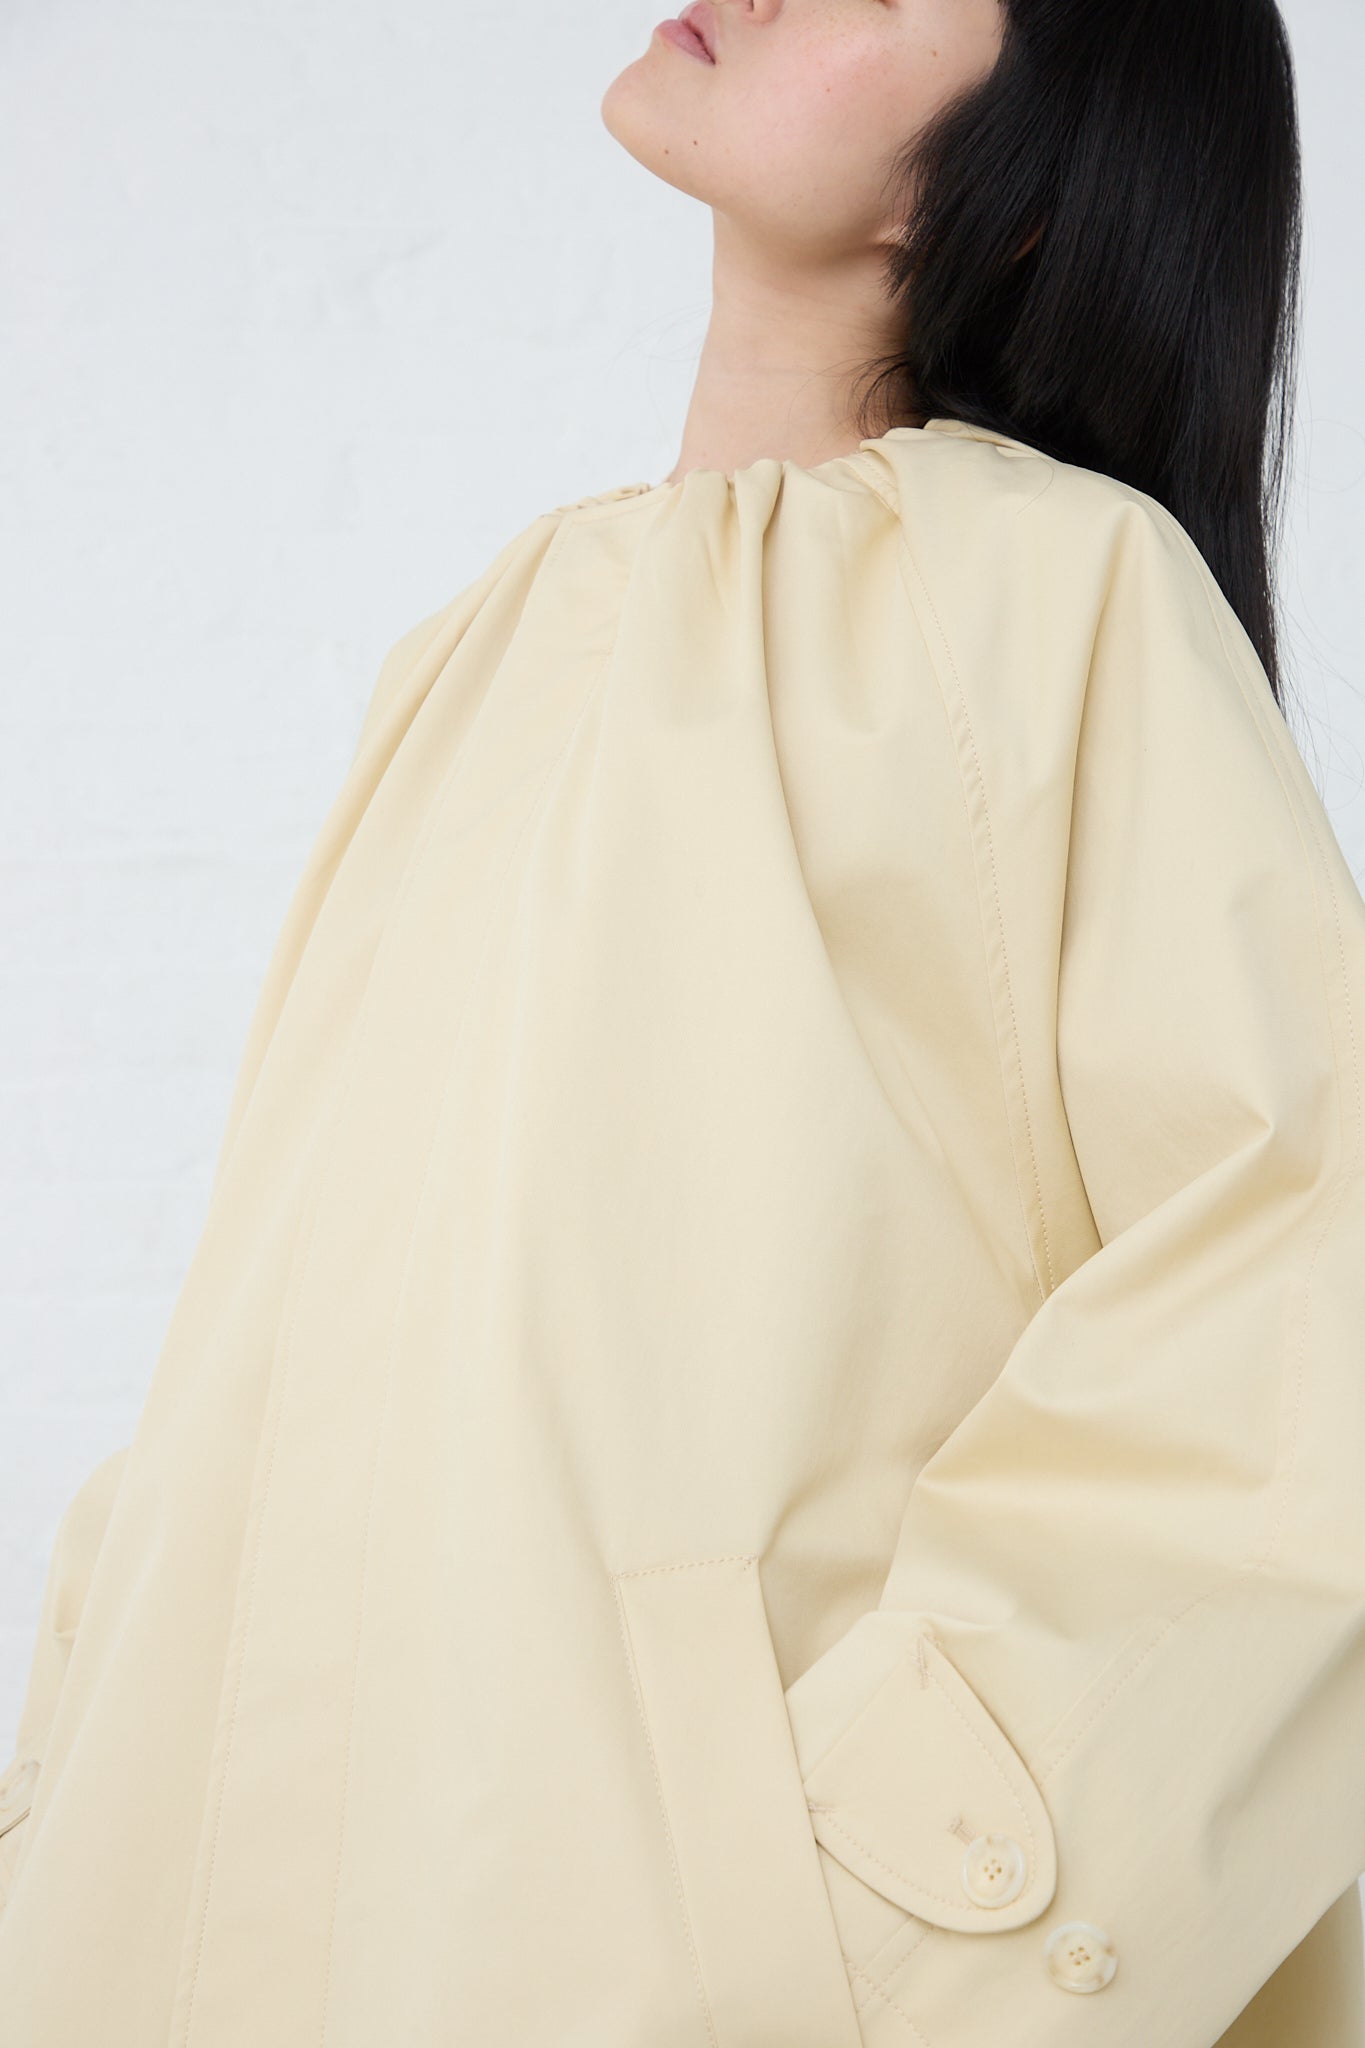 A woman wearing a MM6 Pale Yellow Trench Coat. Side view and up close.